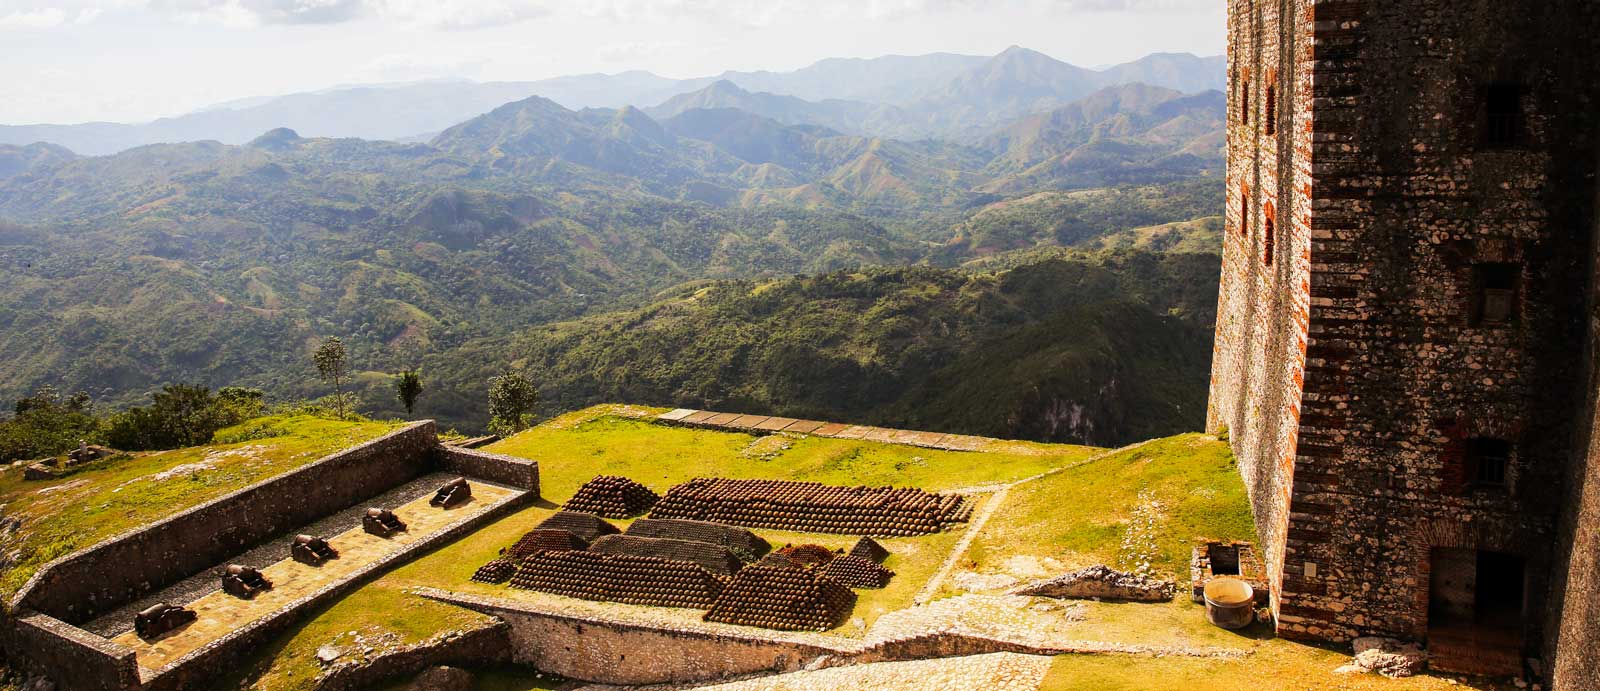 Image of citadelle Laferrière, Haiti, with mountains in background